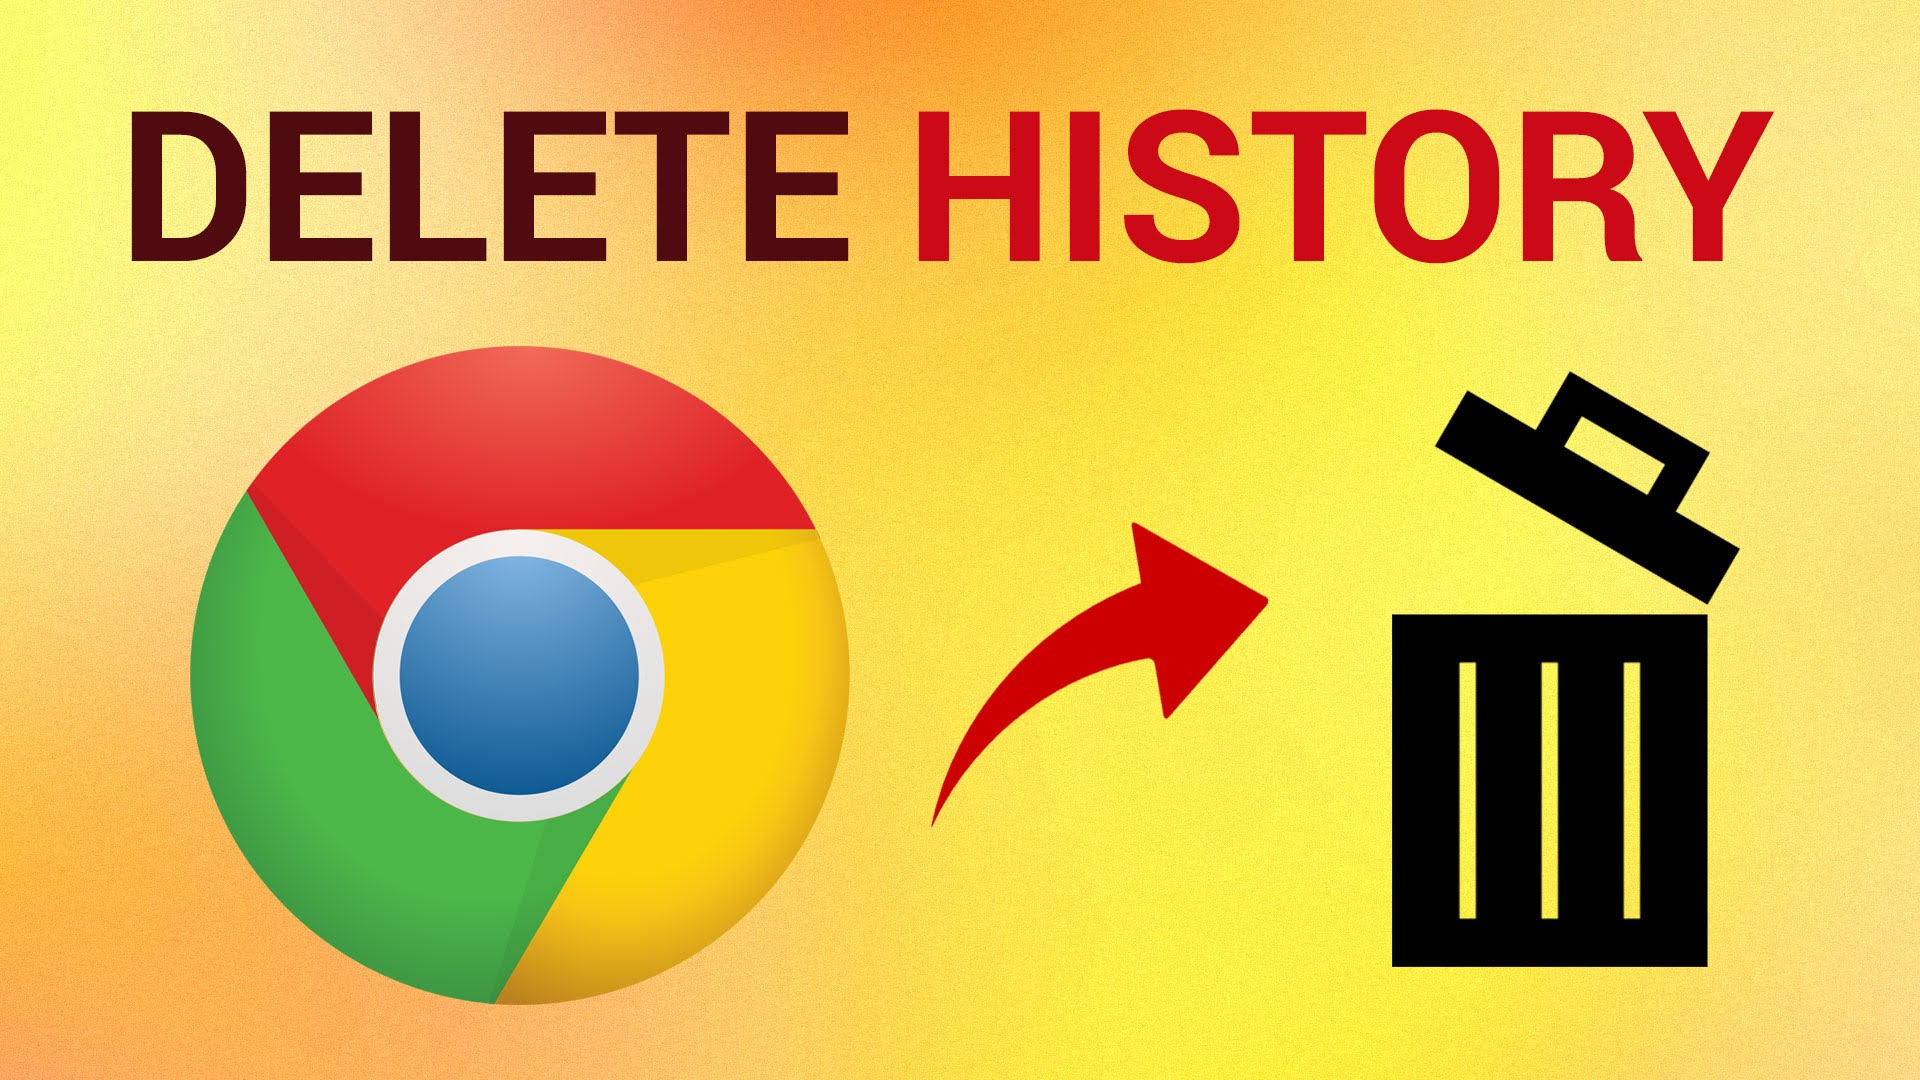 How to delete history from Google chrome